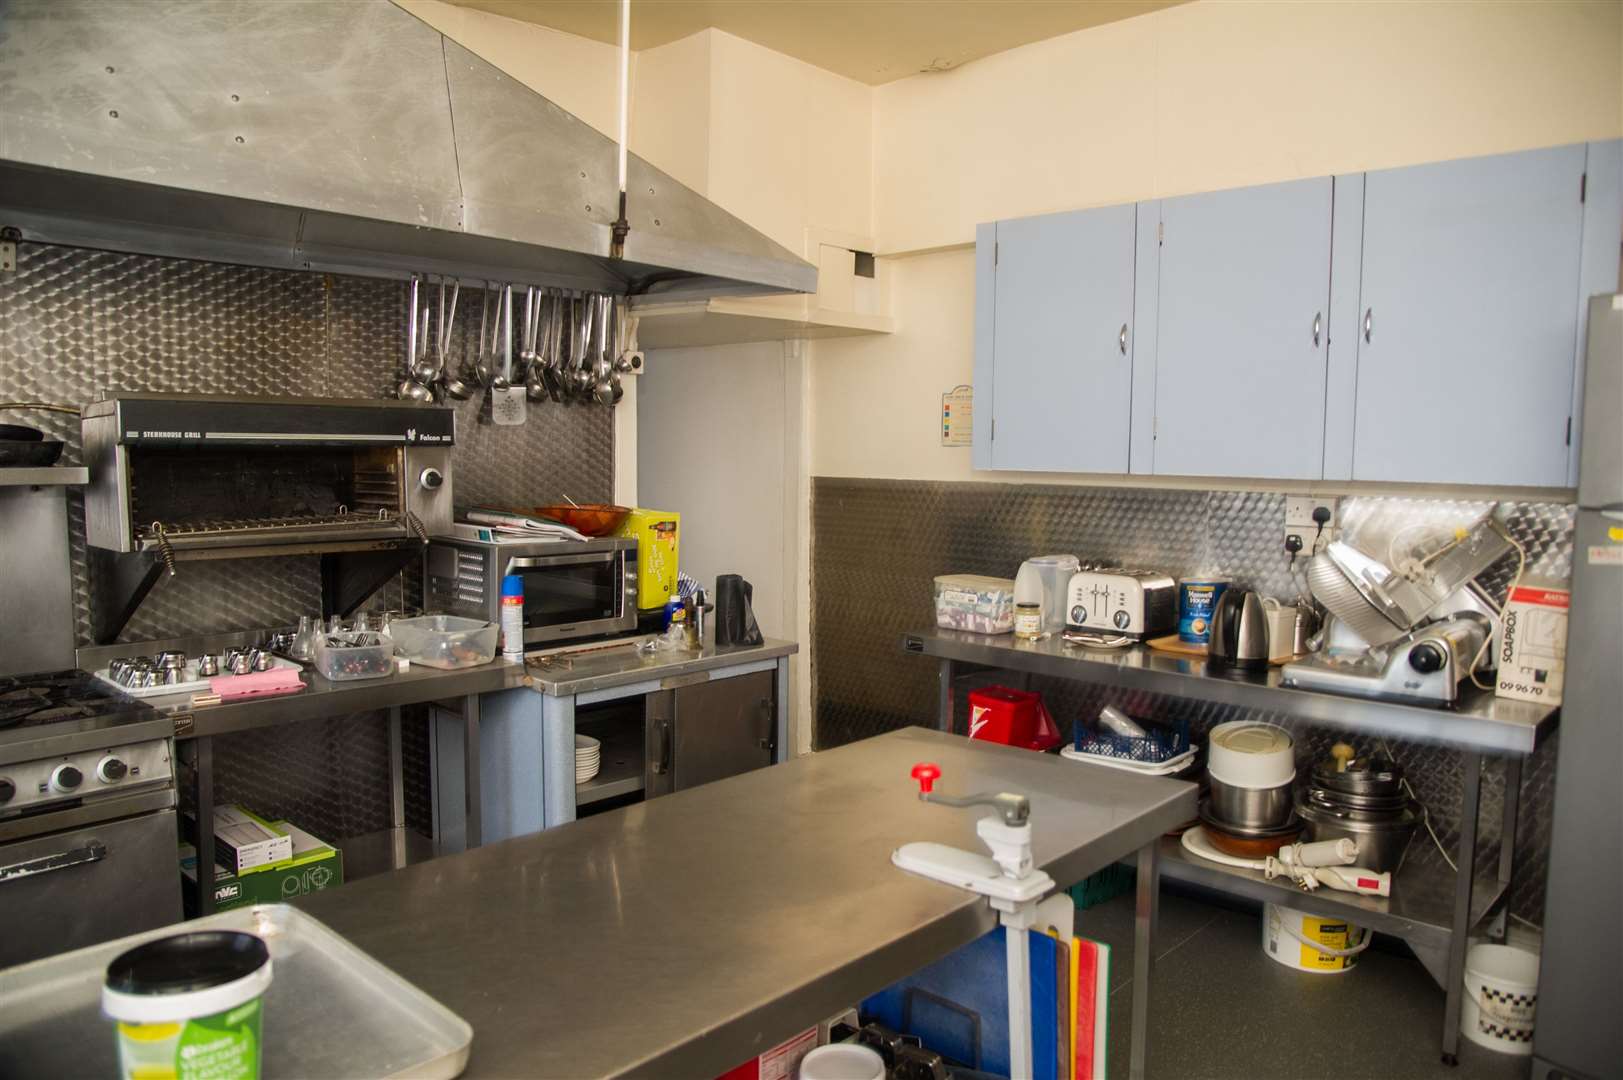 One of the hotel's kitchens on the ground floor.